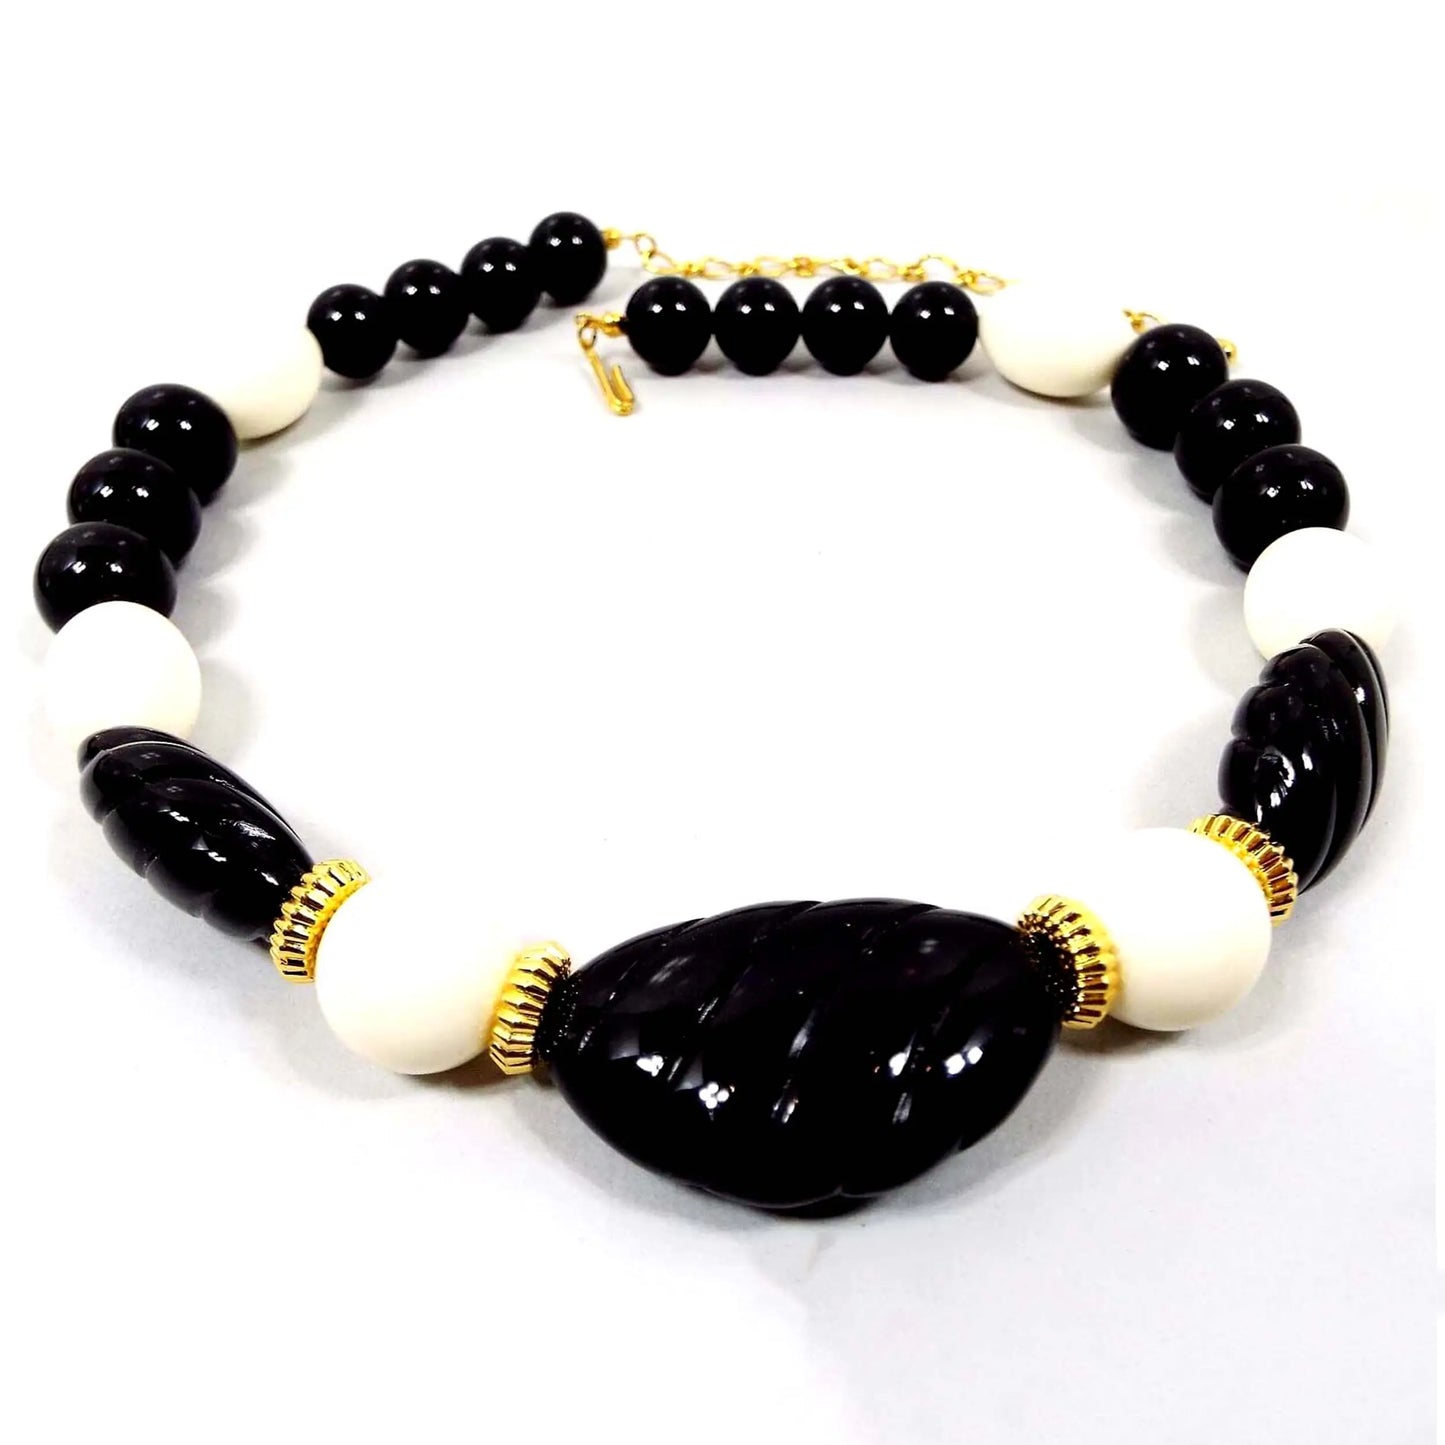 Front view of the retro vintage black and white lucite beaded necklace. The metal is gold tone in color. There are various sizes of round, and oval shaped lucite plastic beads in black and white. There is a chain at one end and a hook on the other to adjust the length. The metal is gold tone in color.